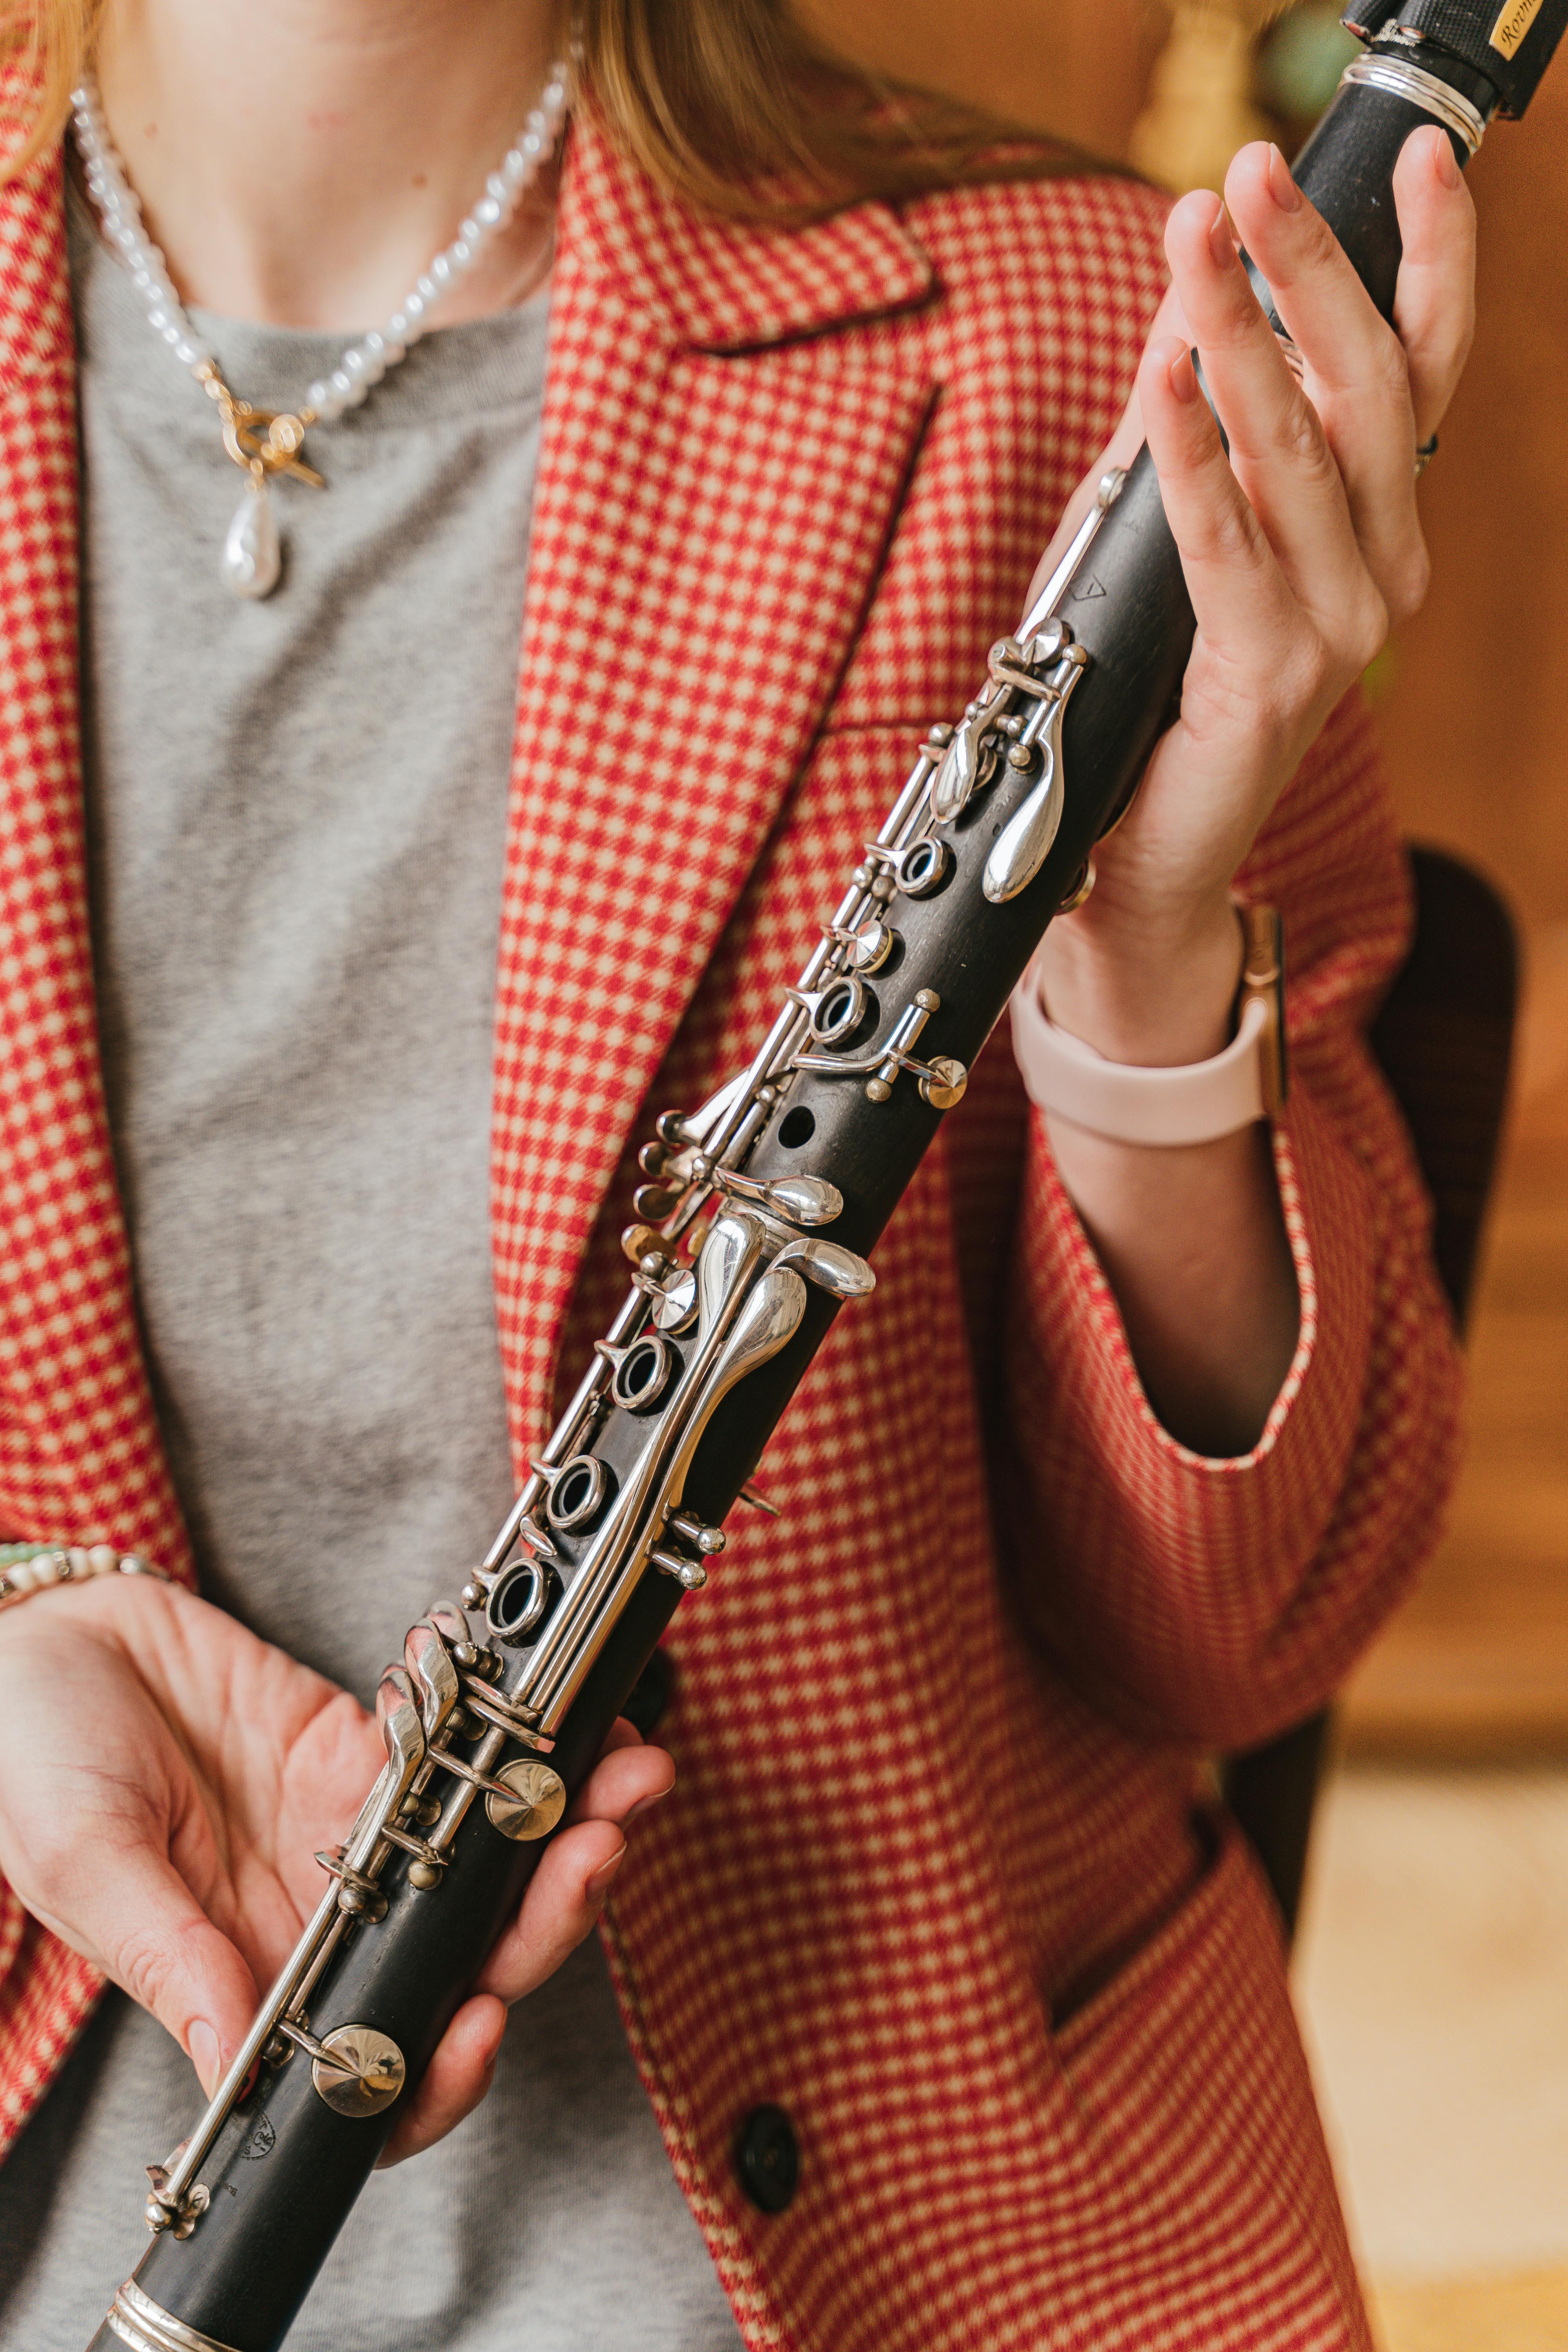 Clarinet Background Images HD Pictures and Wallpaper For Free Download   Pngtree